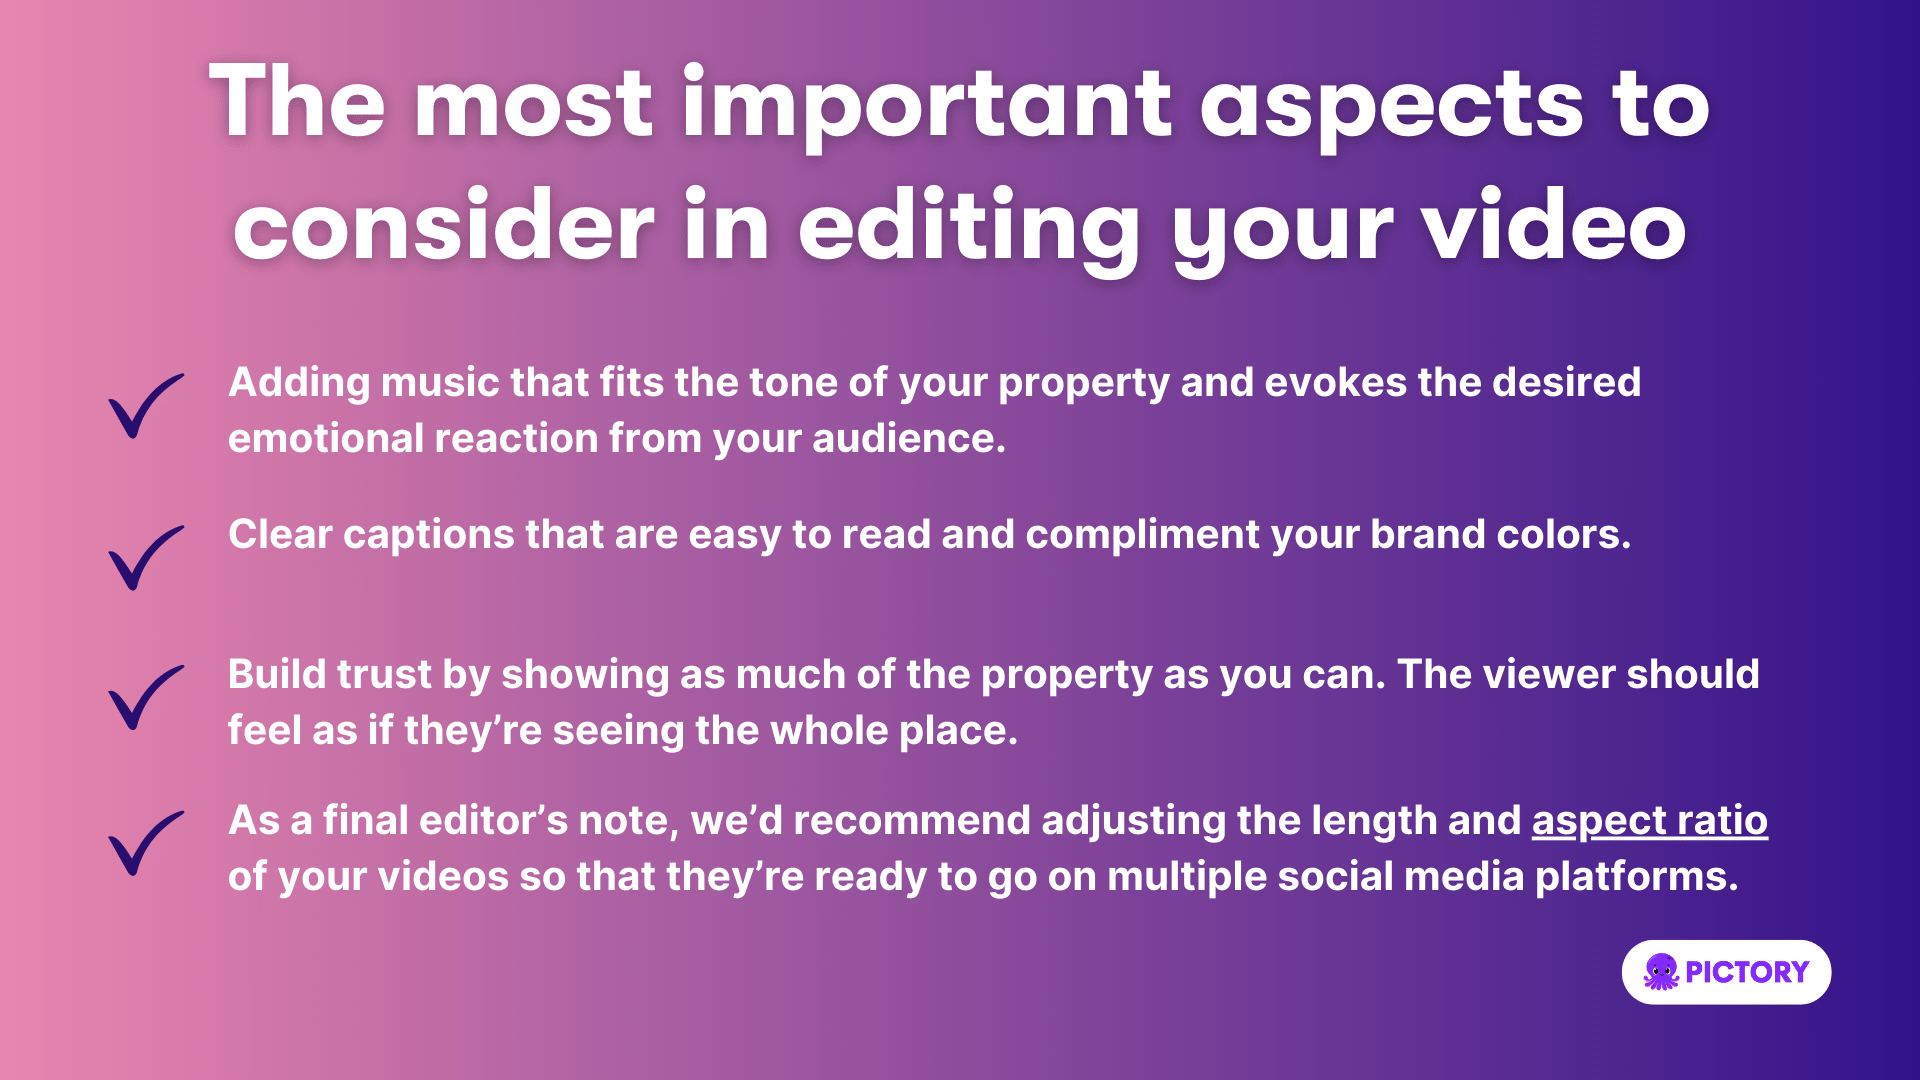 The most important aspects to consider in editing your video